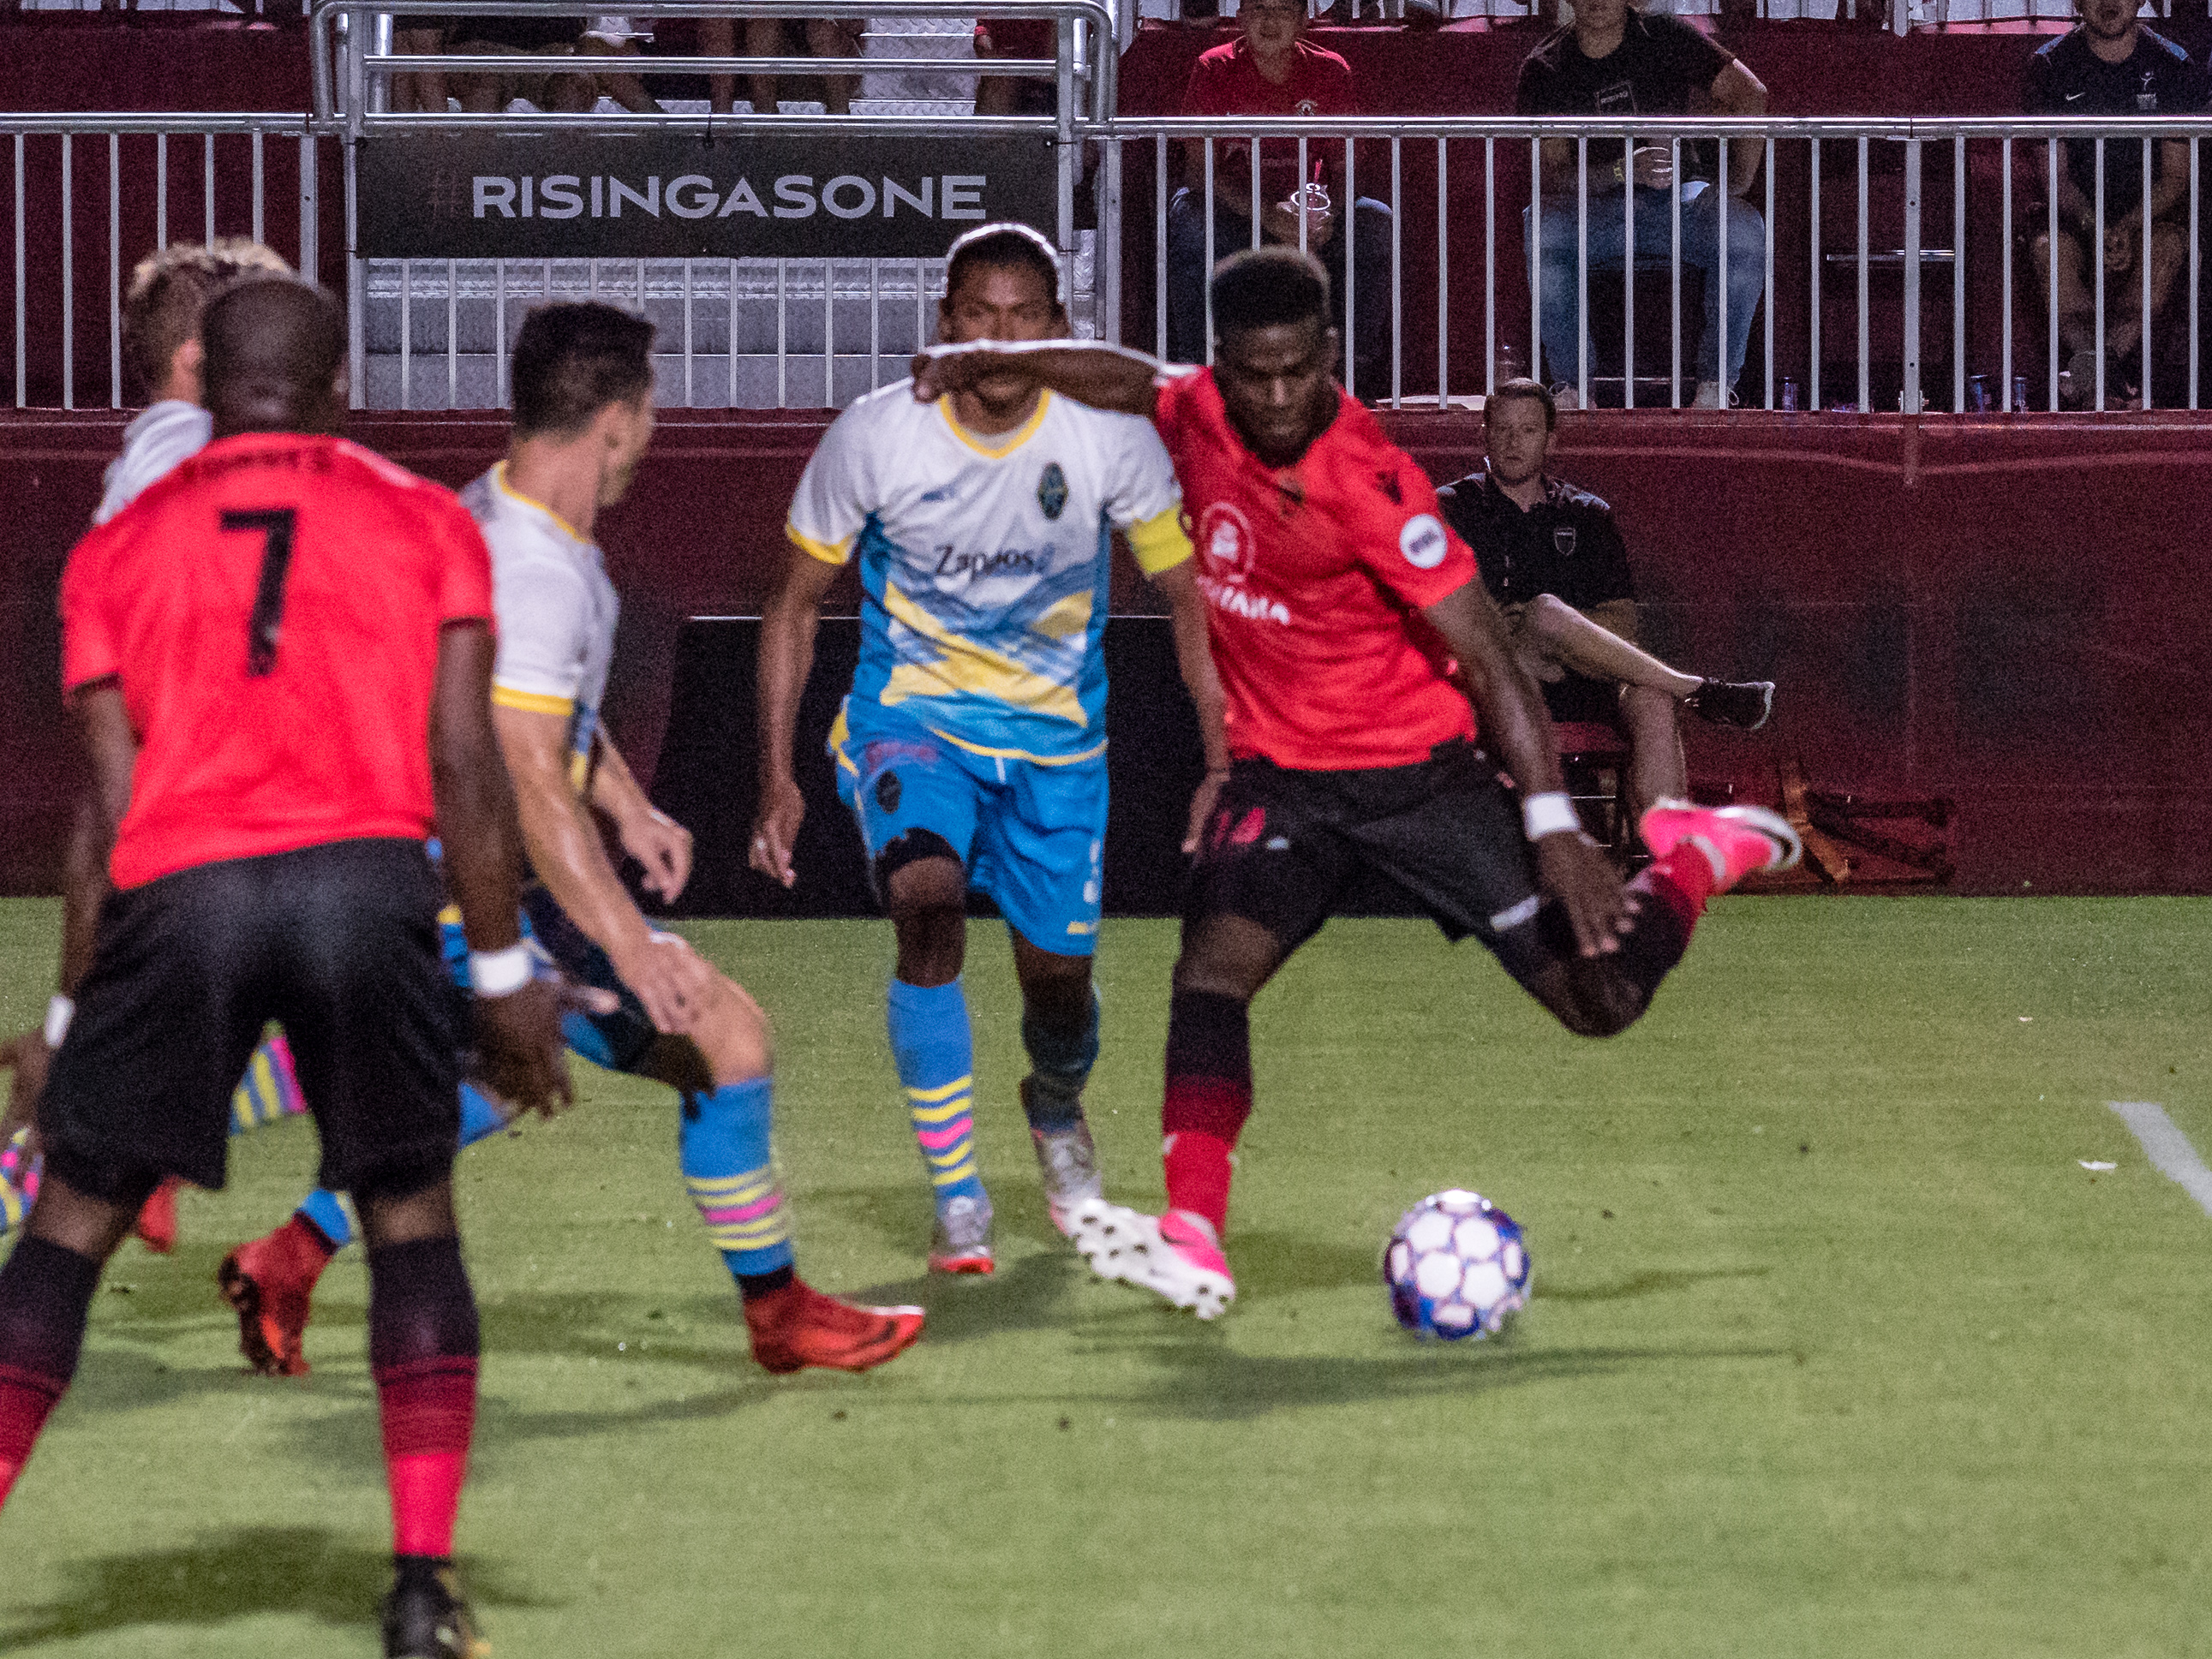 Phoenix Rising Dominate First Match with Las Vegas 4-0